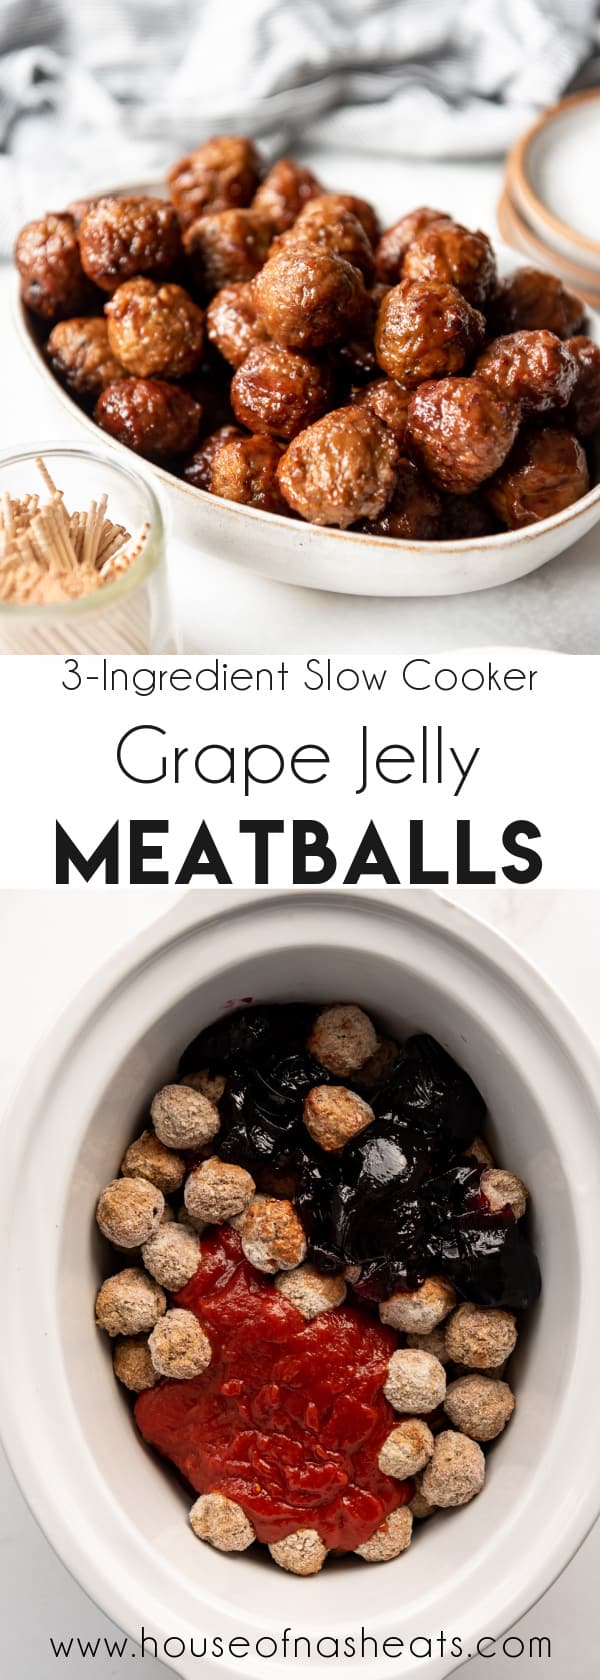 A collage of grape jelly meatball images with text overlay.